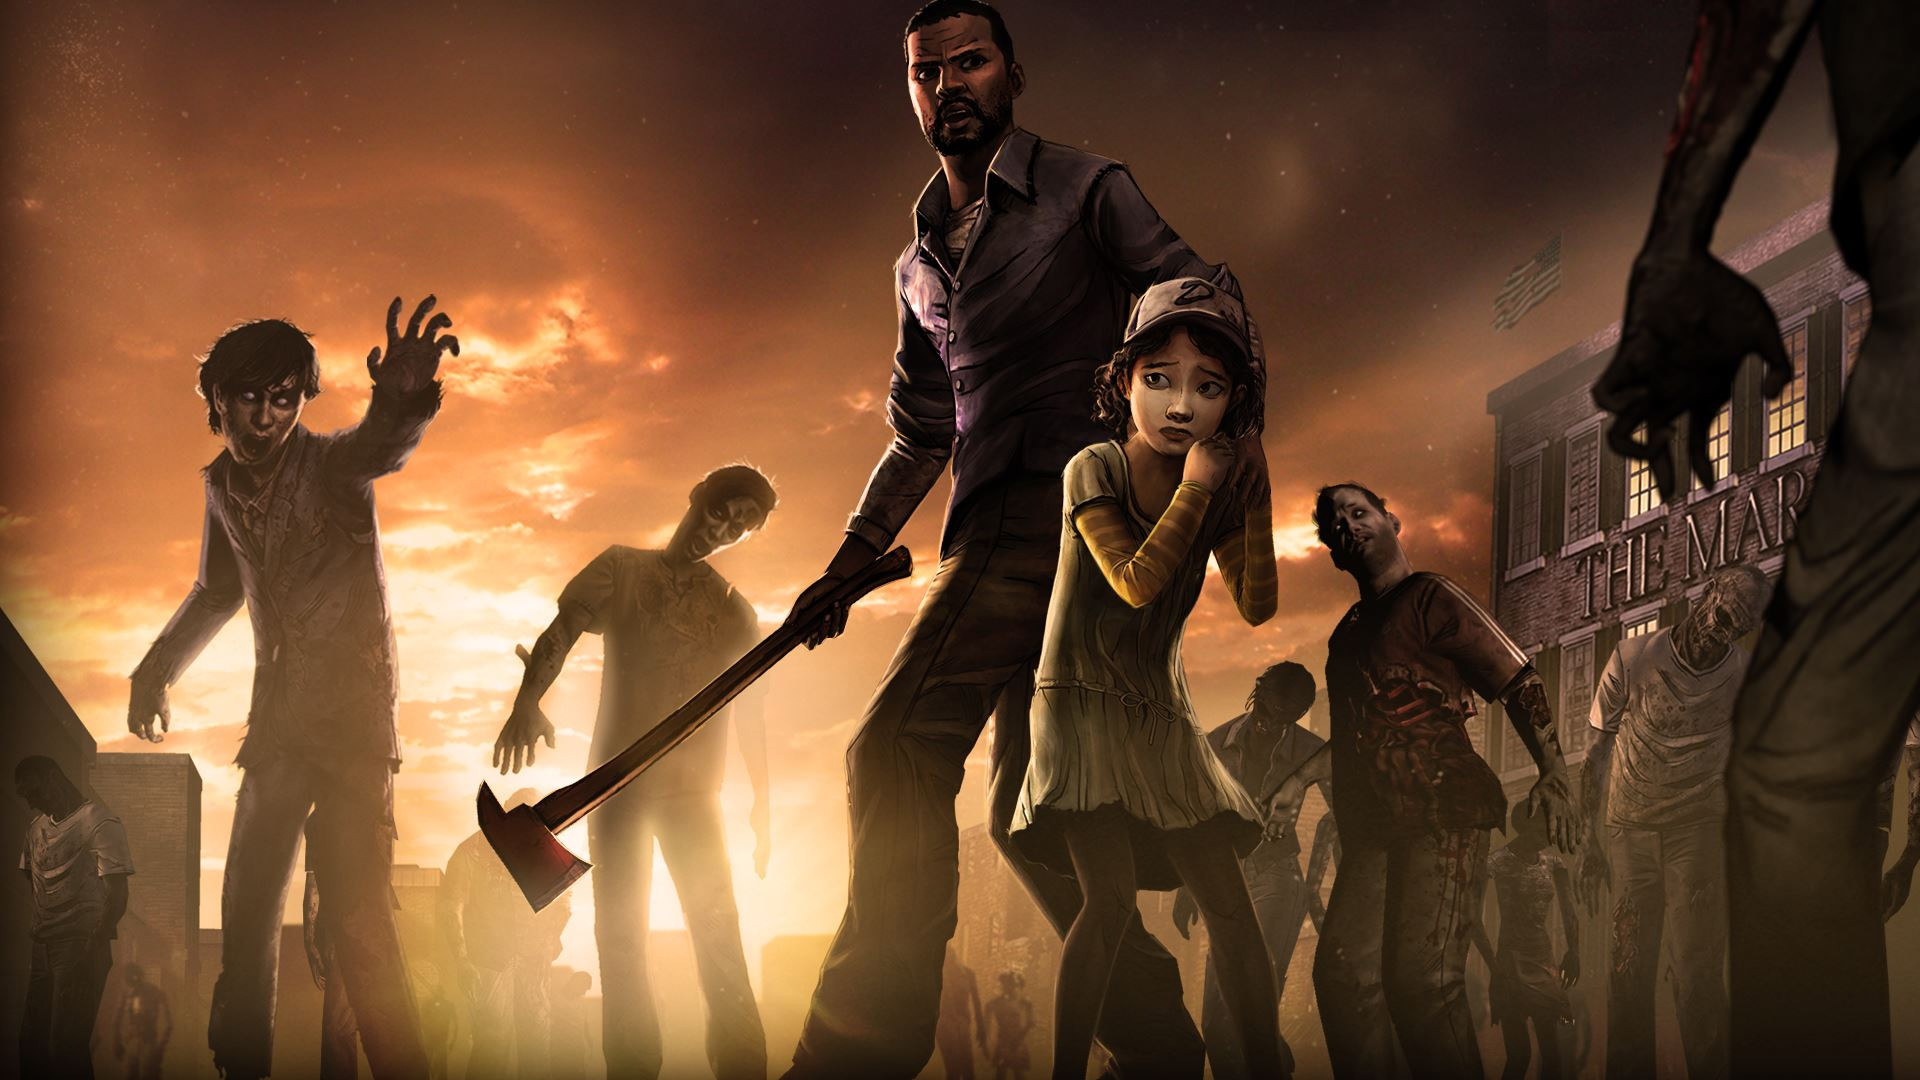 The Walking Dead #696323 | Full HD Widescreen wallpapers for ...